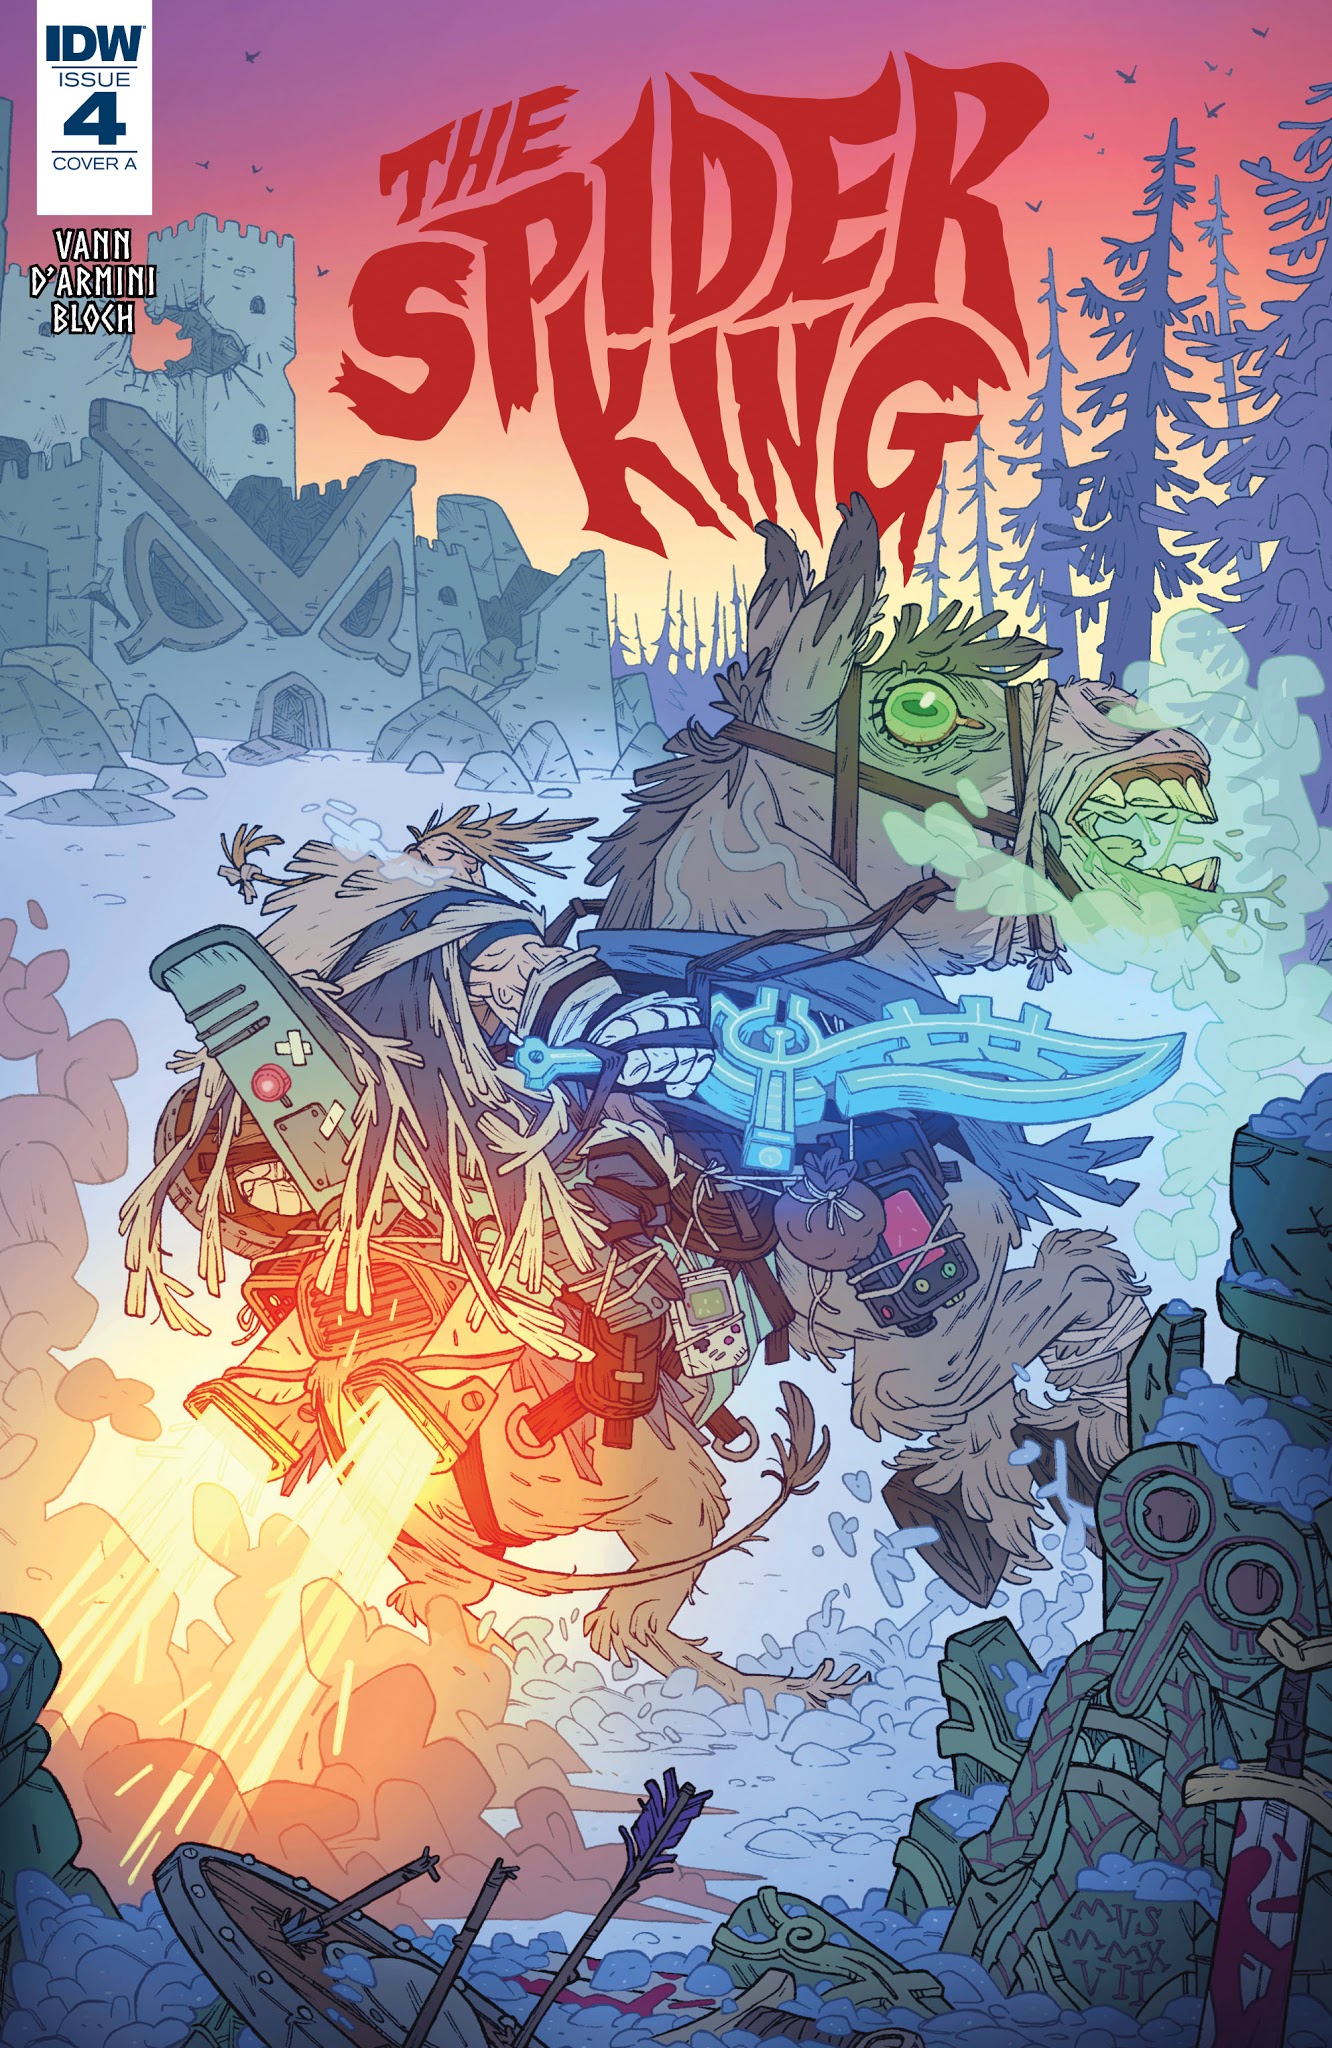 Read online The Spider King comic -  Issue #4 - 1